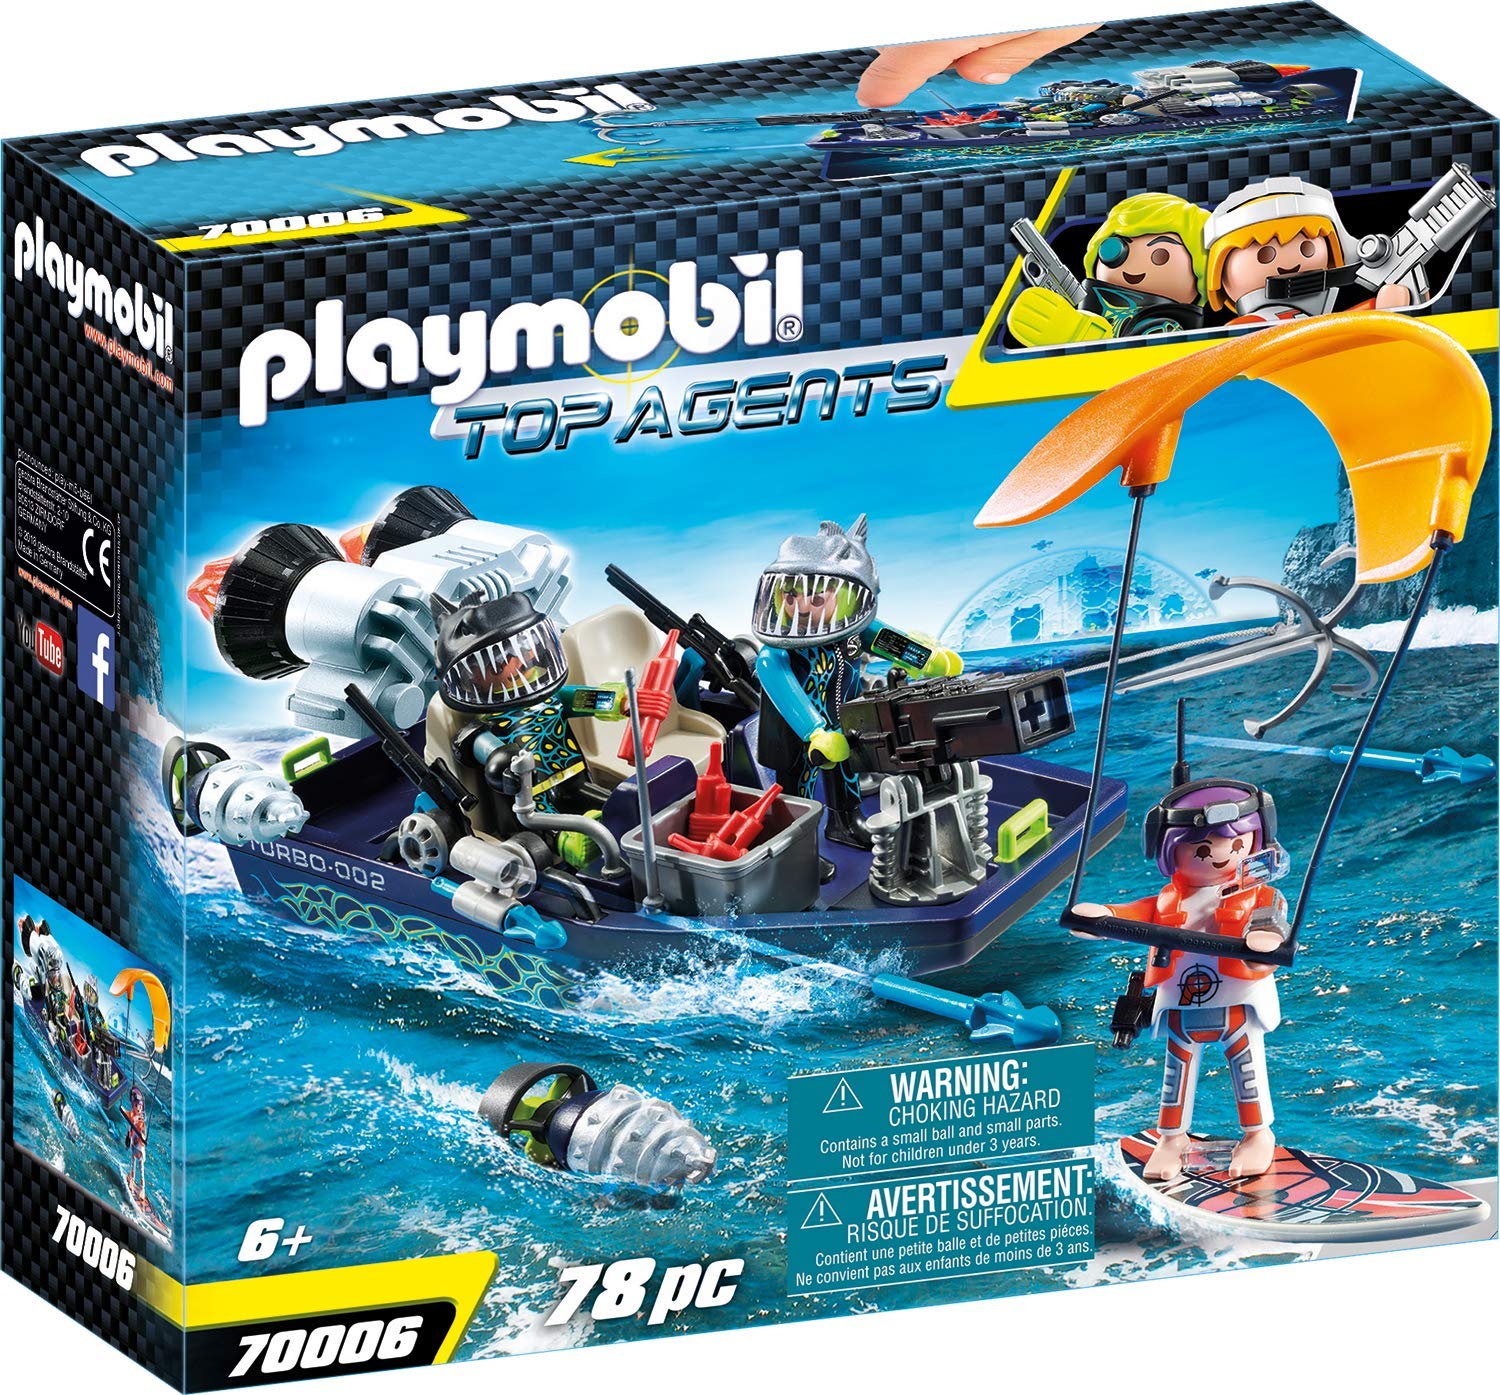 Playmobil 70006 Top Agents Team S.H.A.R.K. Harpoon Craft, Multi-Colour